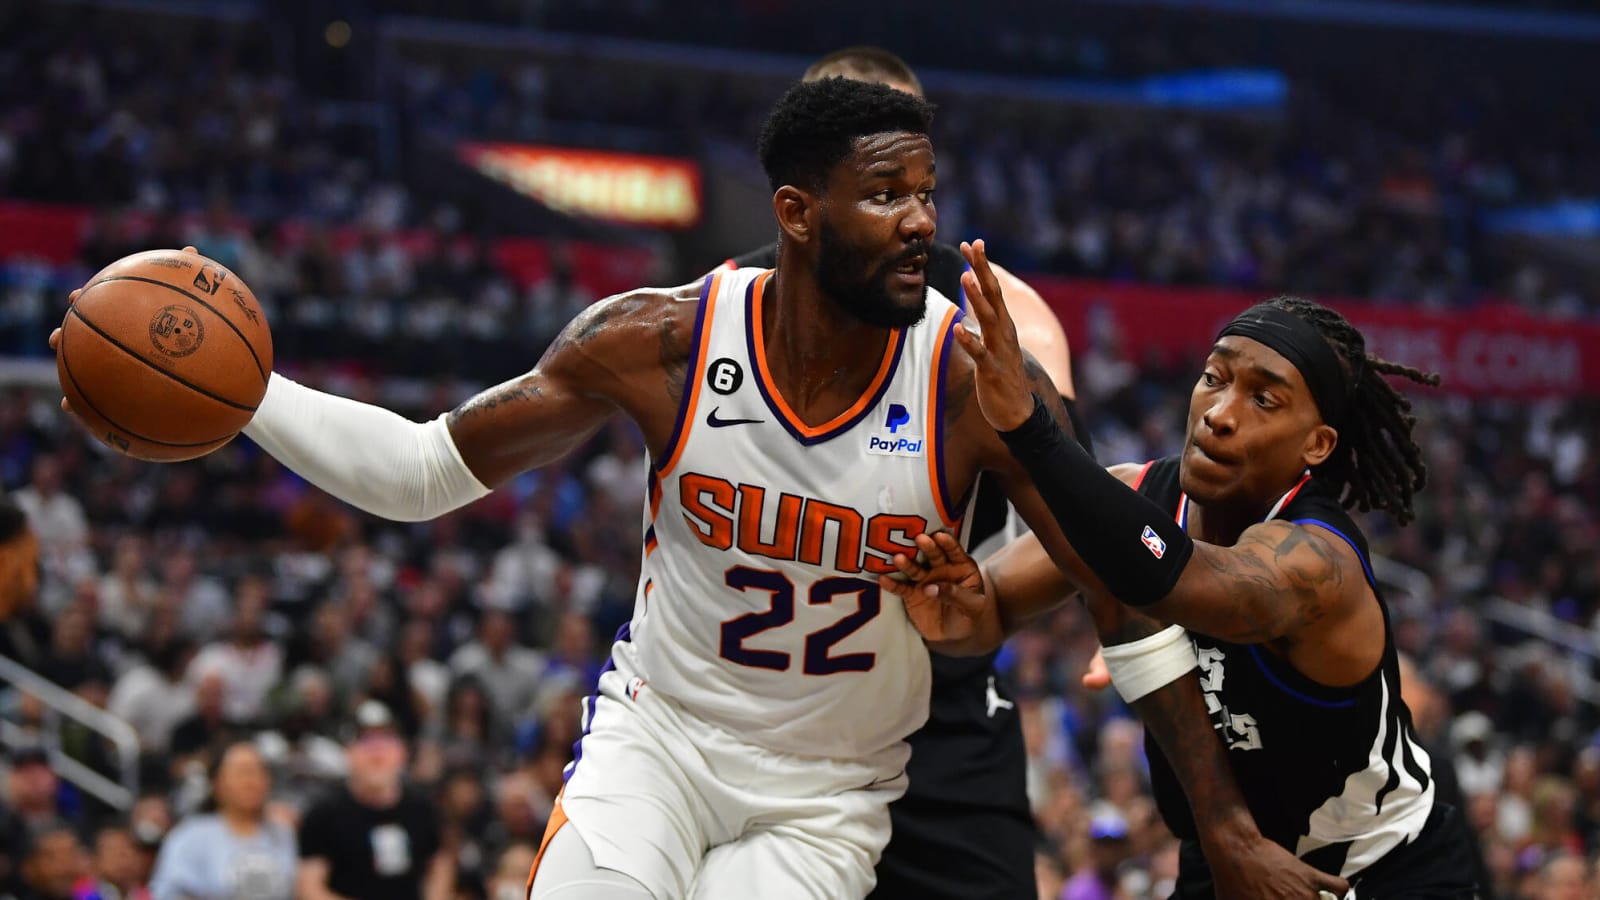 This Pacers-Suns trade proposal sends Deandre Ayton to Indiana